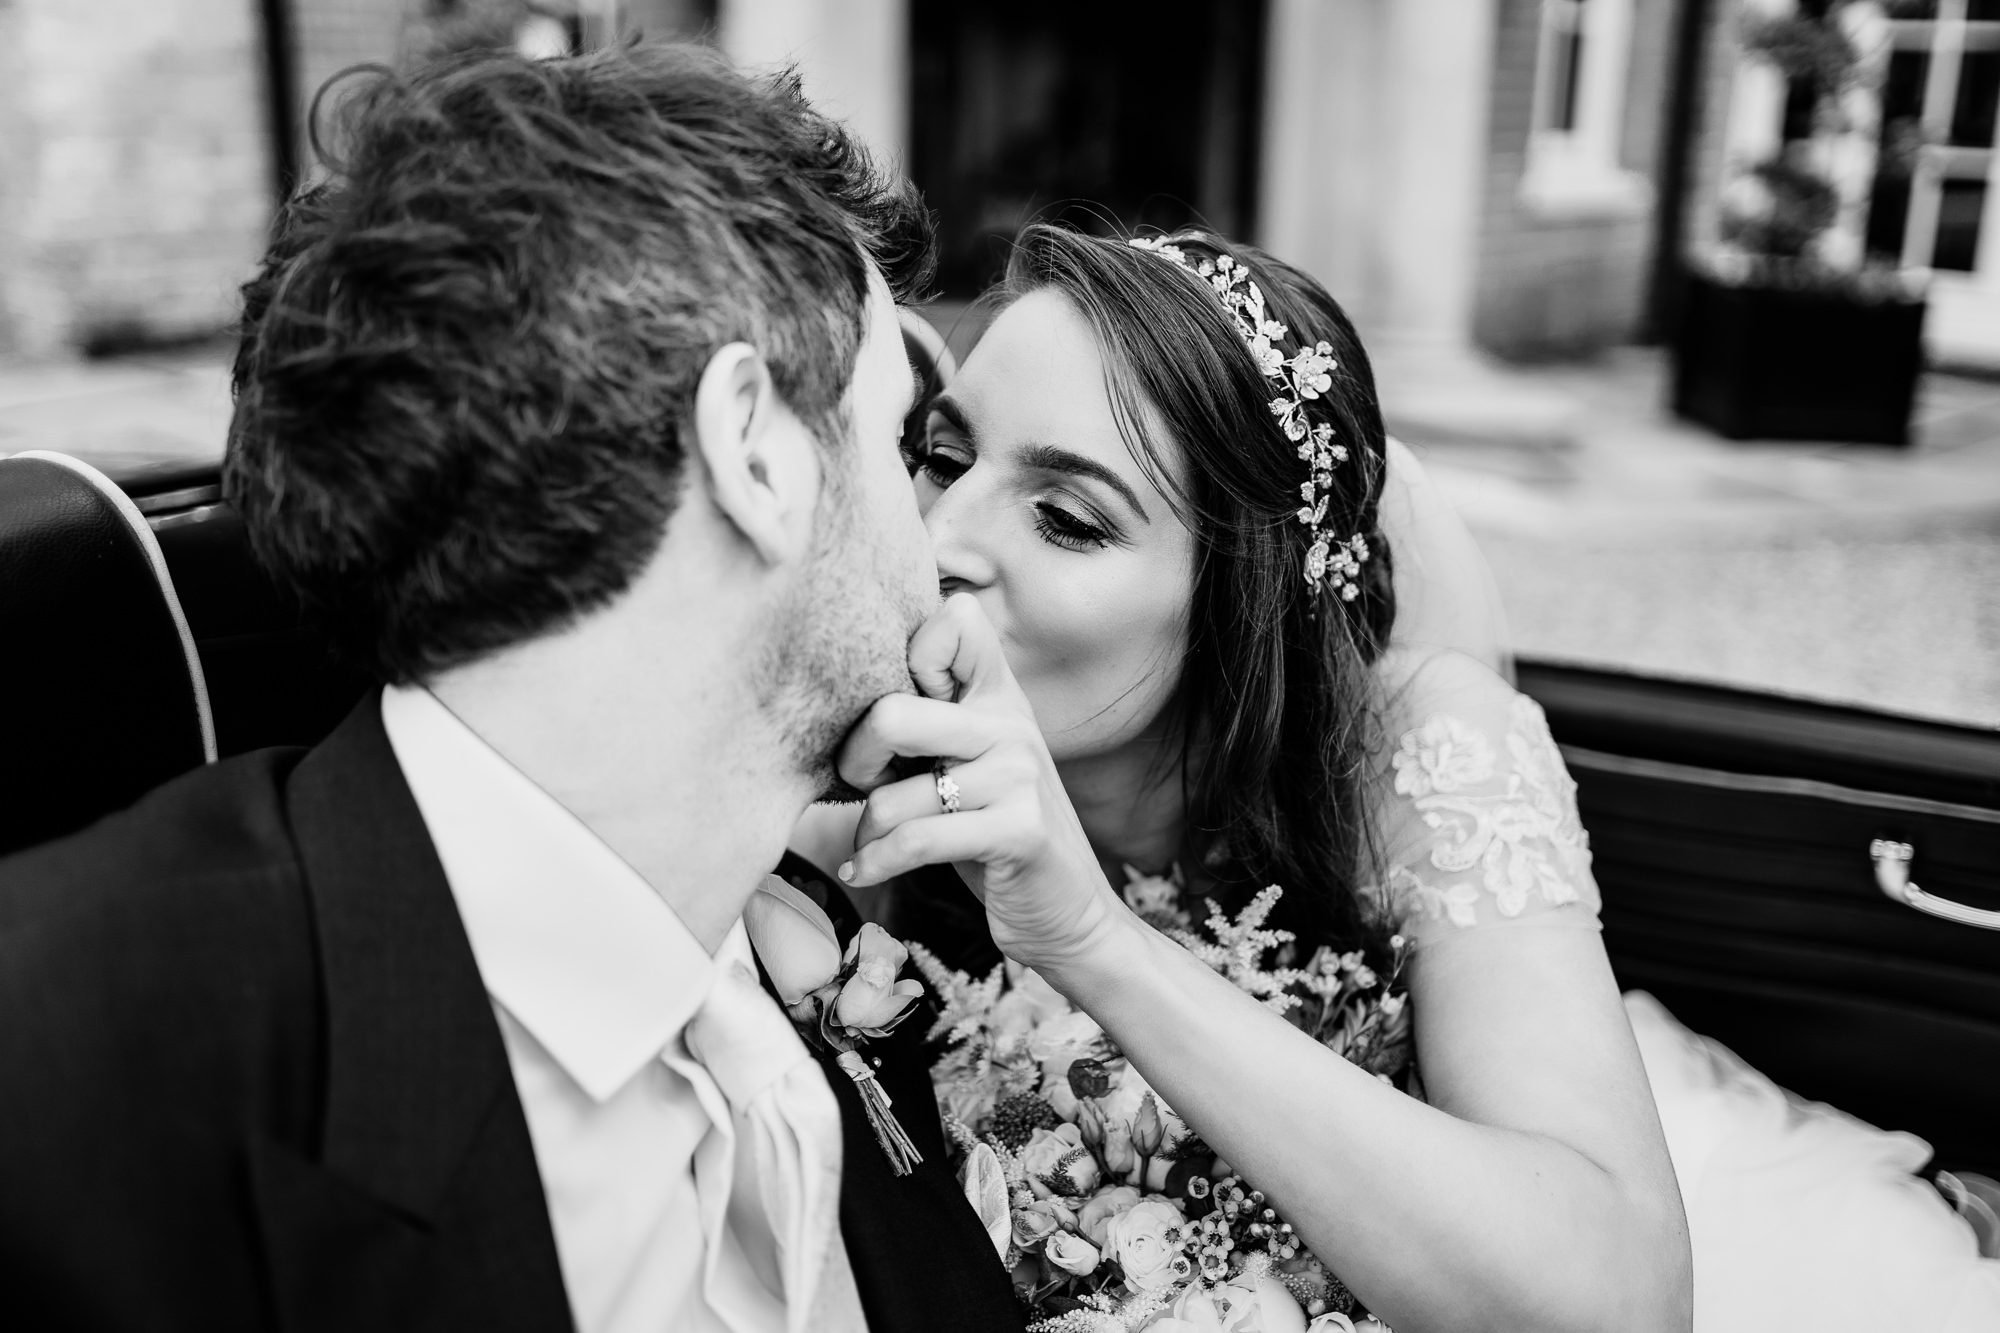 Black and white reportage wedding photography.